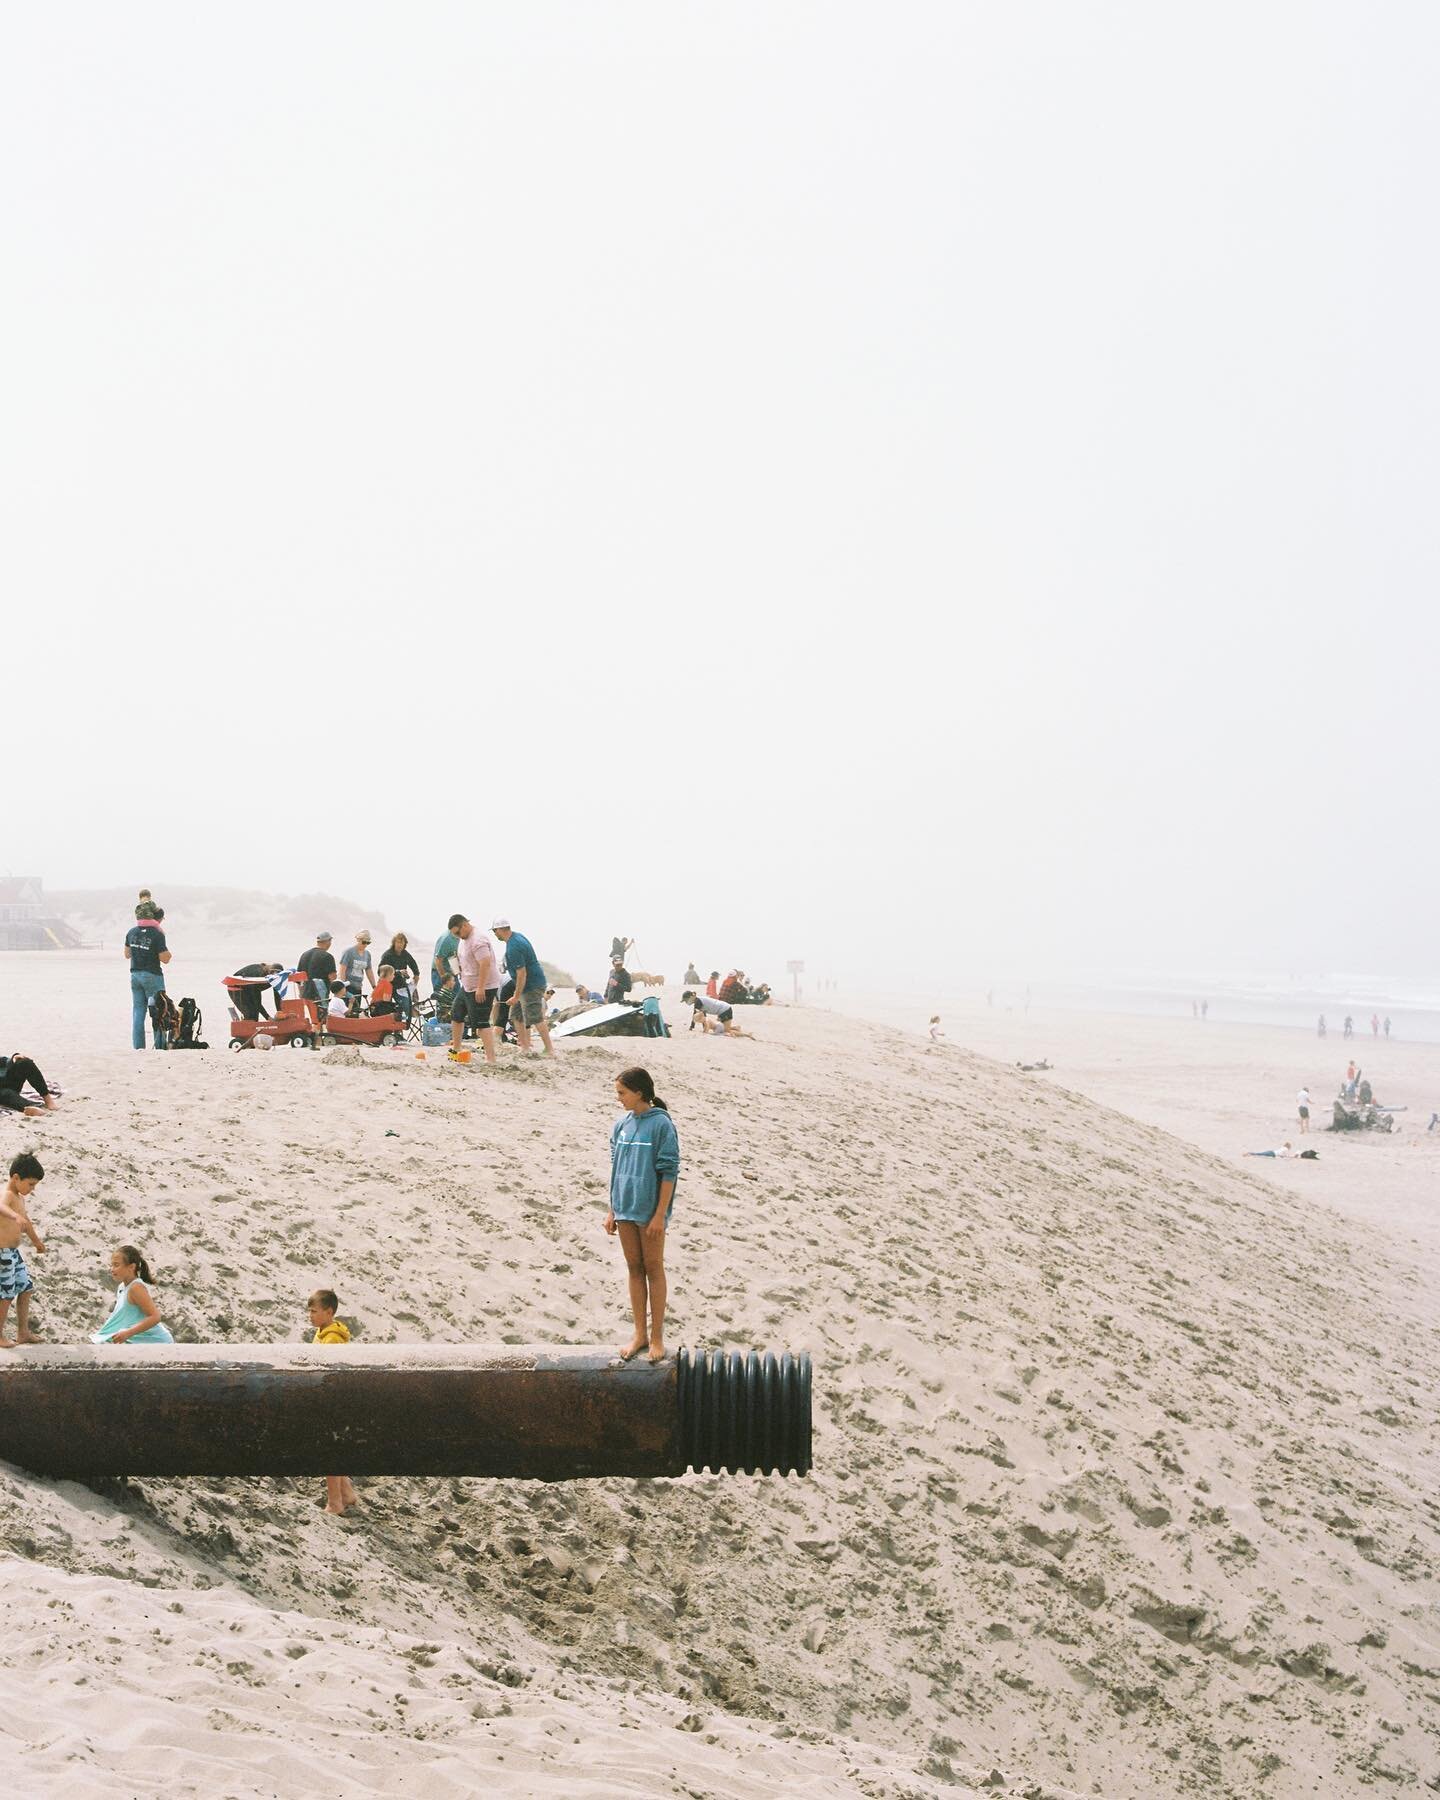 The fog moves and you realize there are in fact others on the beach with you.